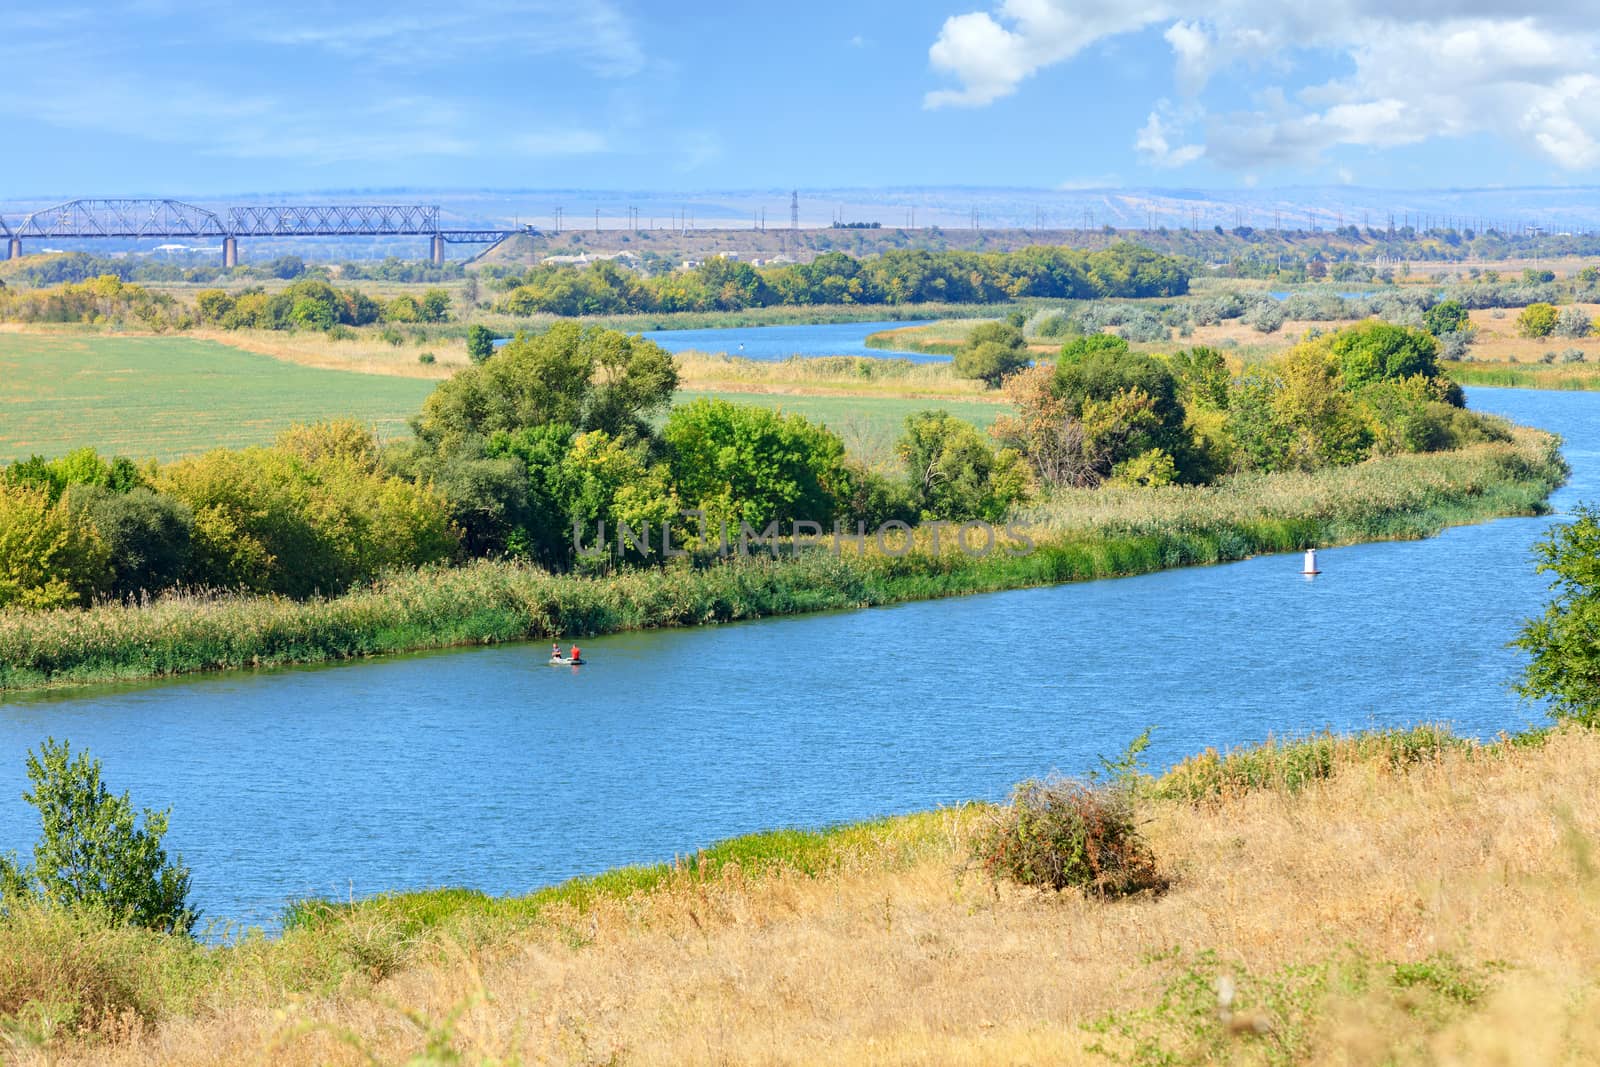 The wide bend of the Southern Bug River is immersed in the greenery of the garden and dried grass on the slope in the foreground, the river reaches the railway bridge on the horizon.